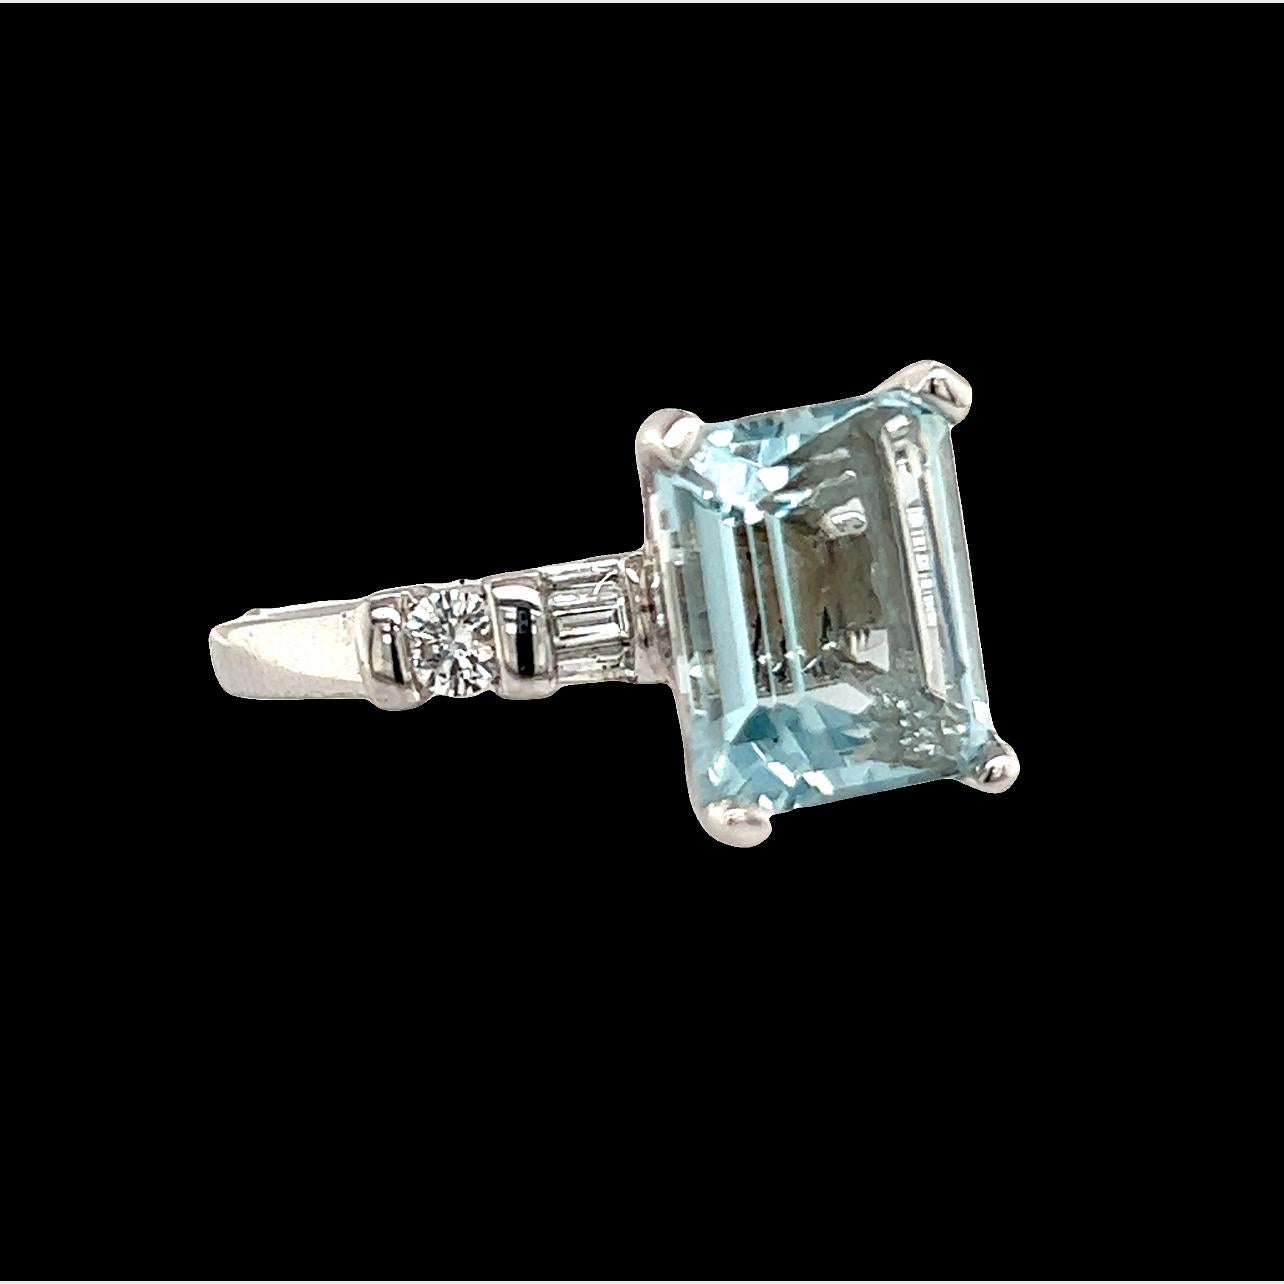 Natural Aquamarine Diamond Ring 6.25 14k Gold 4.8 TCW Certified $5,975 121436

Nothing says, “I Love you” more than Diamonds and Pearls!

This Aquamarine ring has been Certified, Inspected, and Appraised by Gemological Appraisal